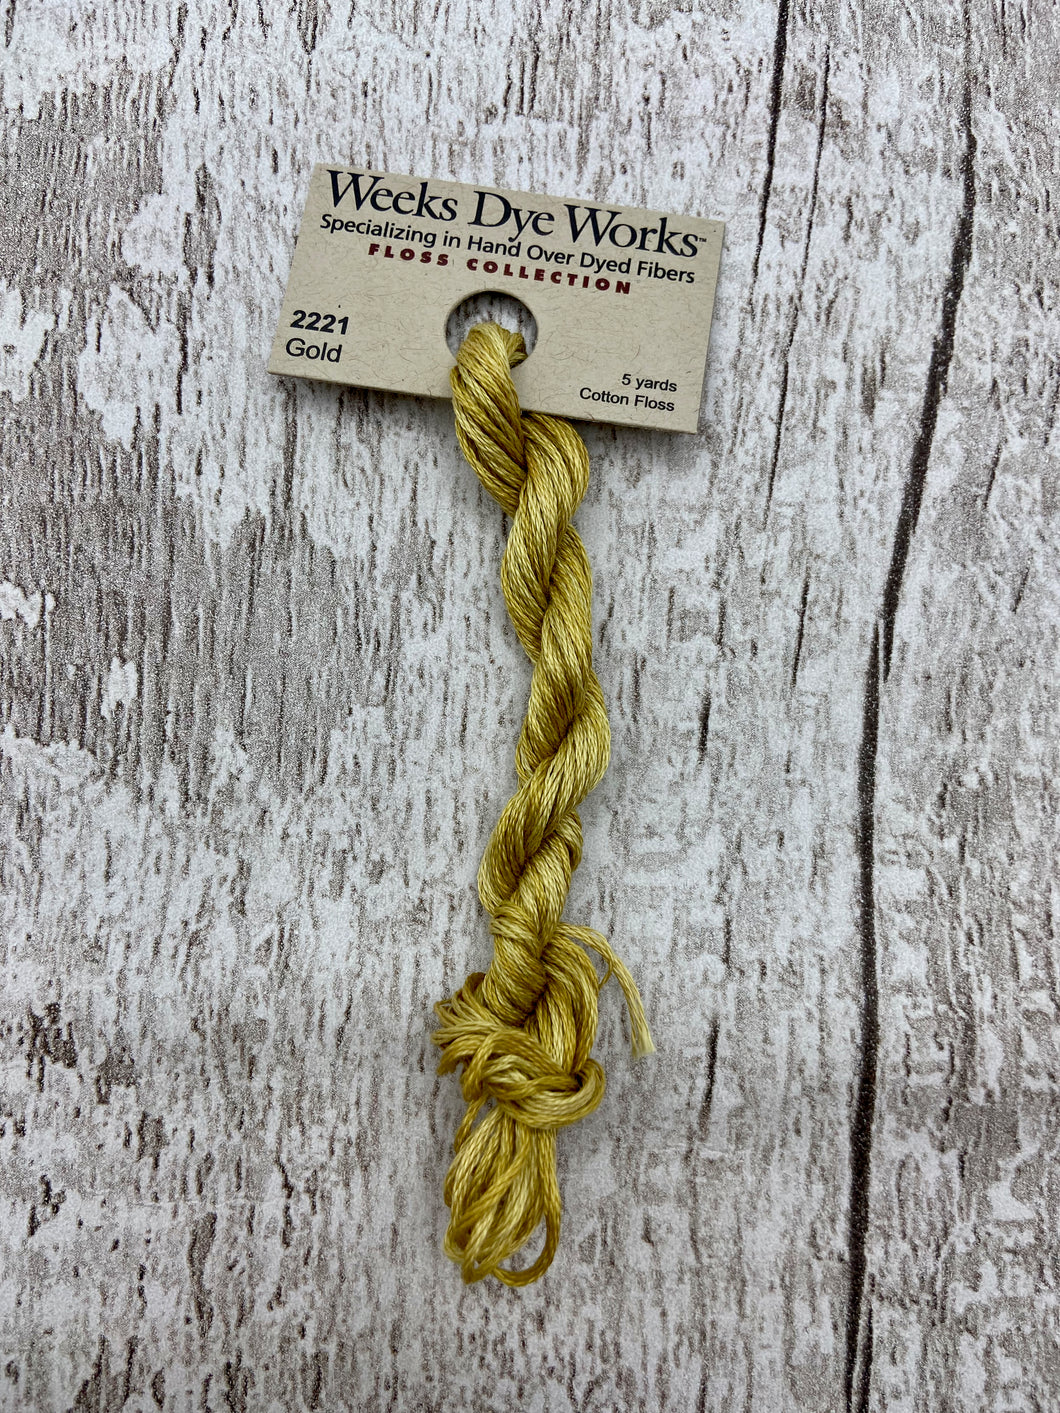 Gold (#2221) Weeks Dye Works, 6-strand cotton floss